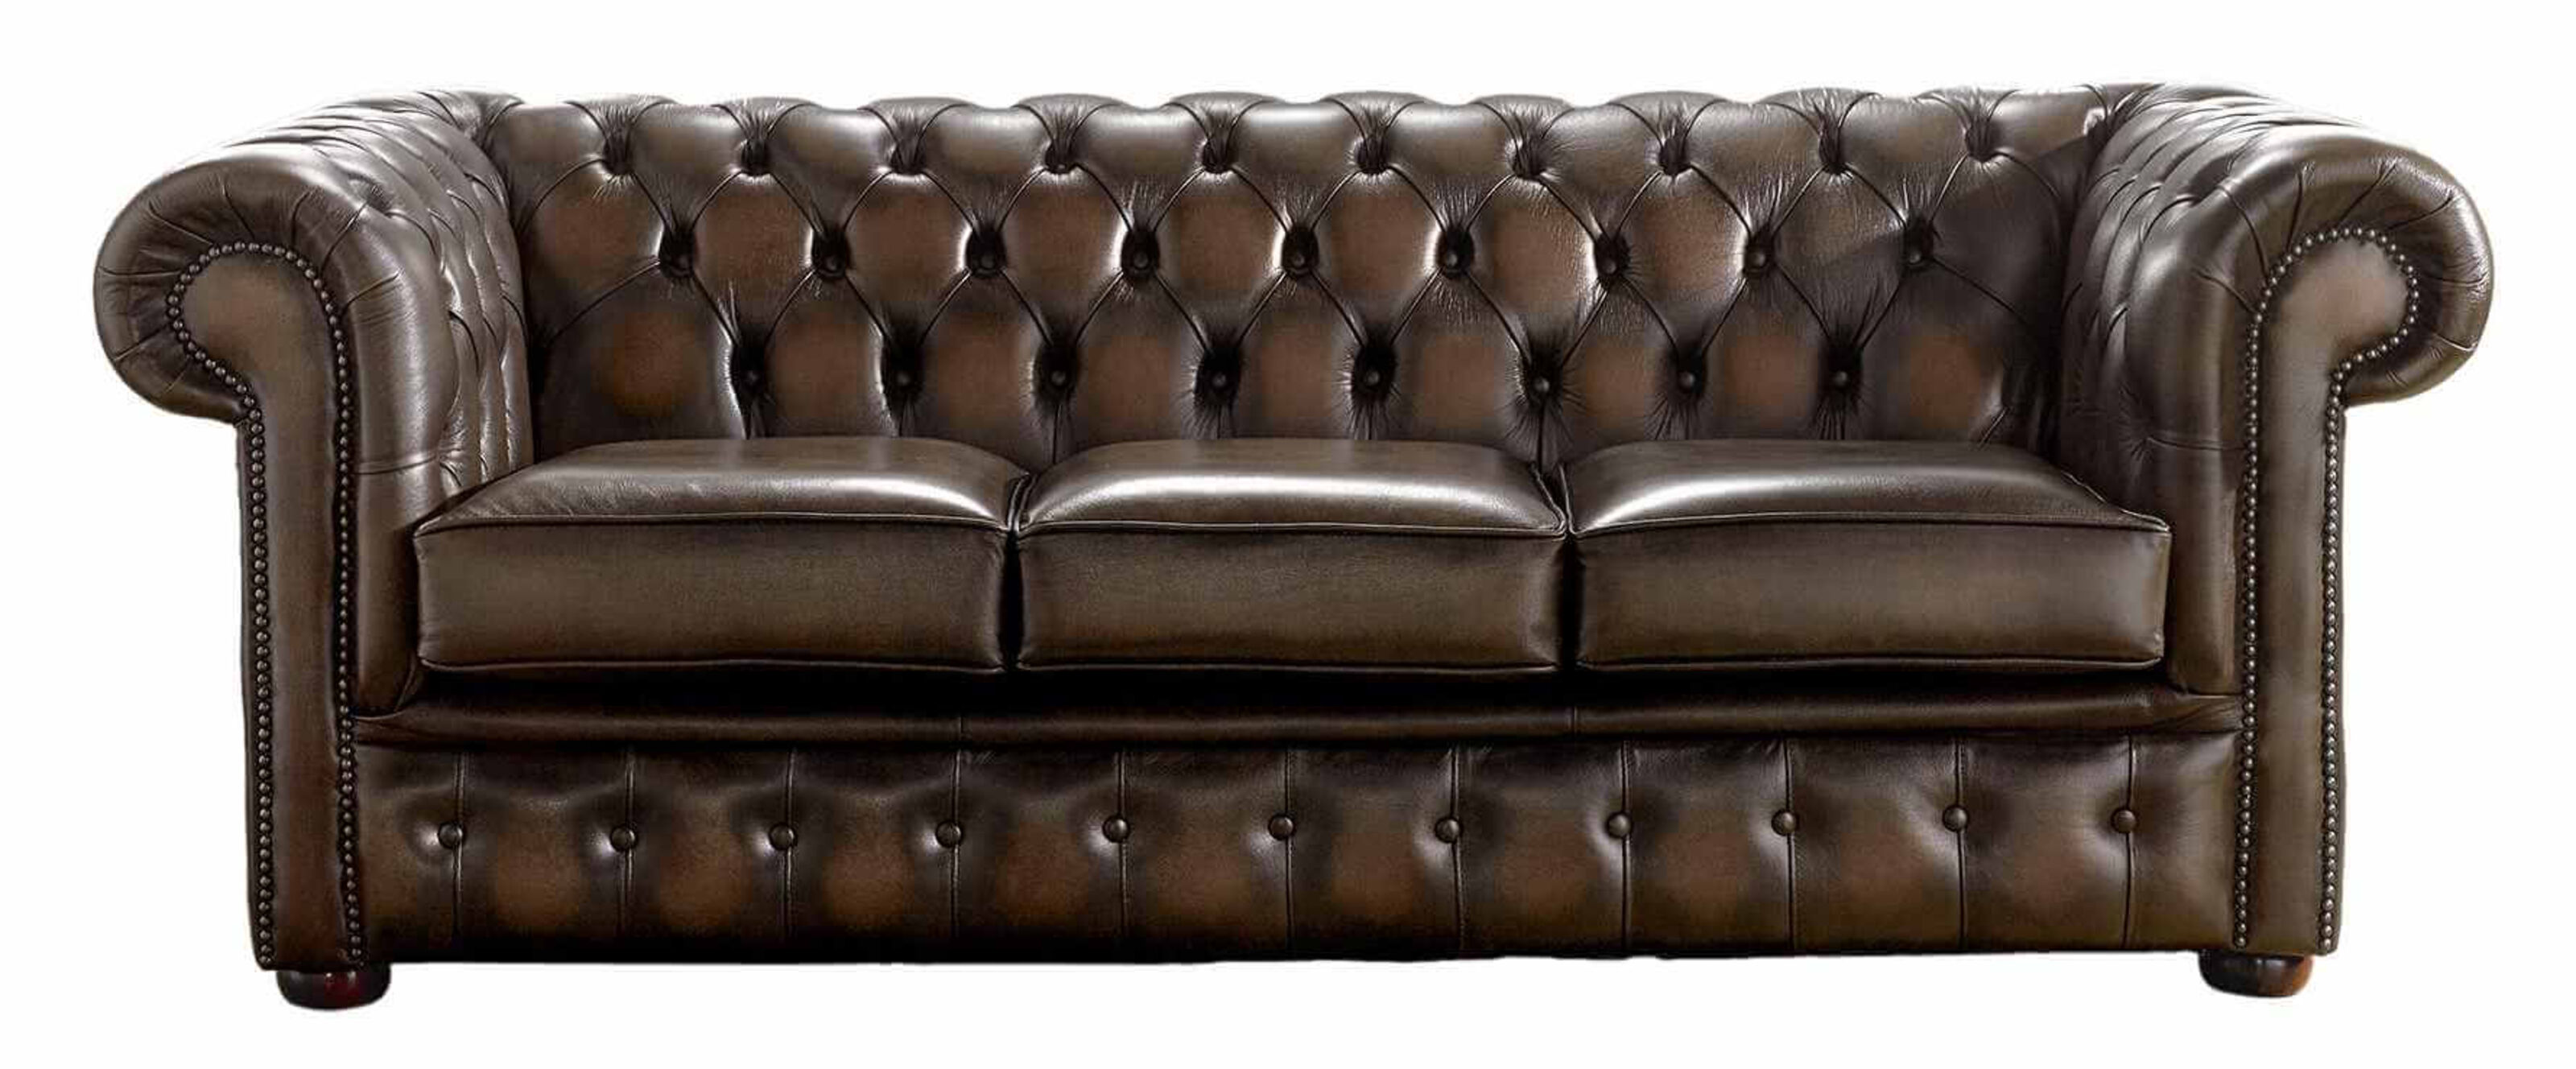 Chesterfield Sofas The Legacy of Craftsmanship from Their Birthplace  %Post Title